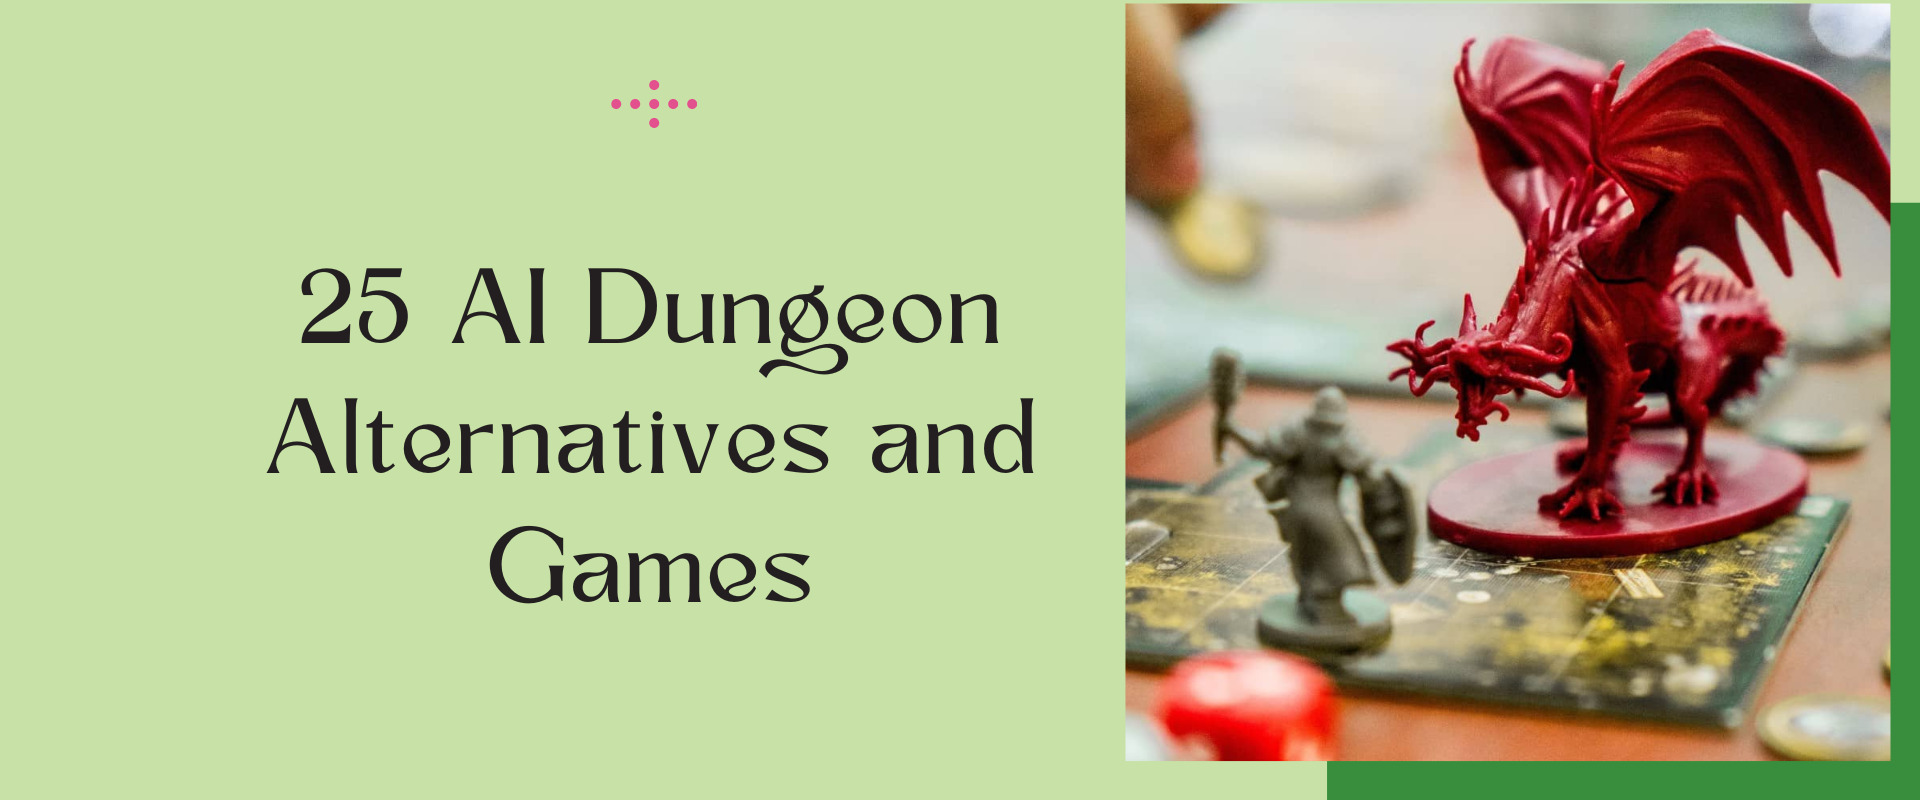 25 AI Dungeon Alternatives and Games – Mockey